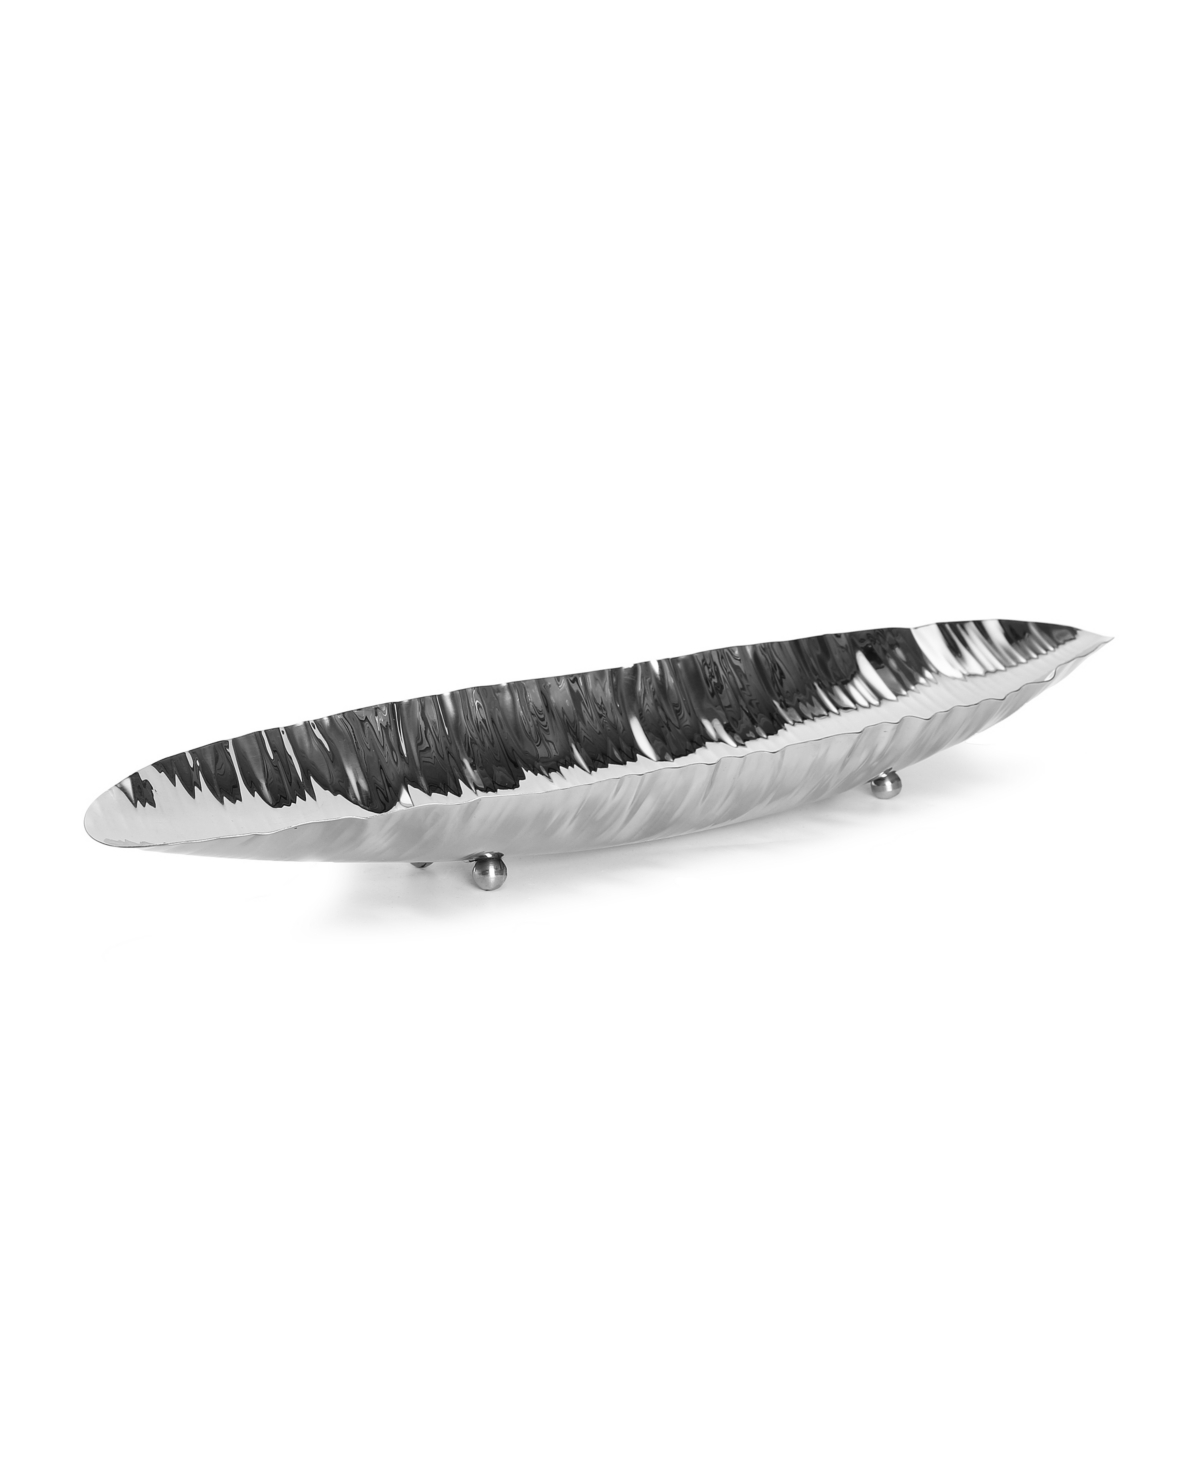 Stainless Steel Boat Dish, 20.5" L - Silver